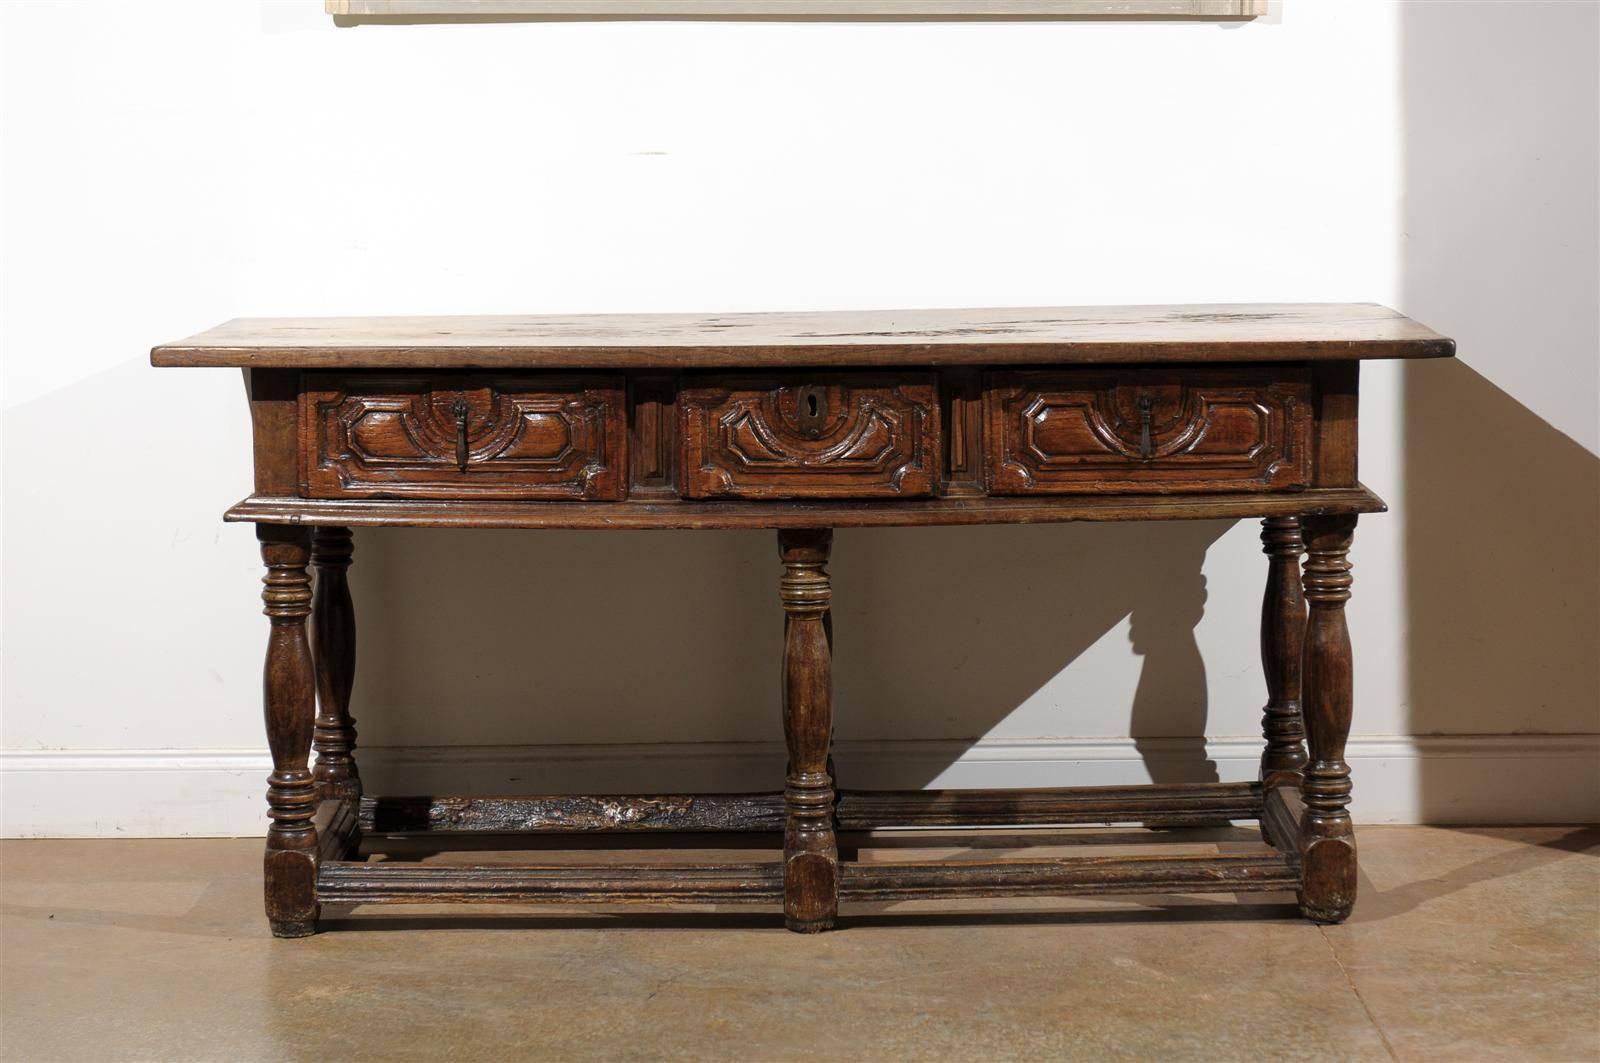 Spanish 17th century Spanish console or sofa table with three drawers. Carved apron on all four sides. Original hand-forged hardware, circa 1650.